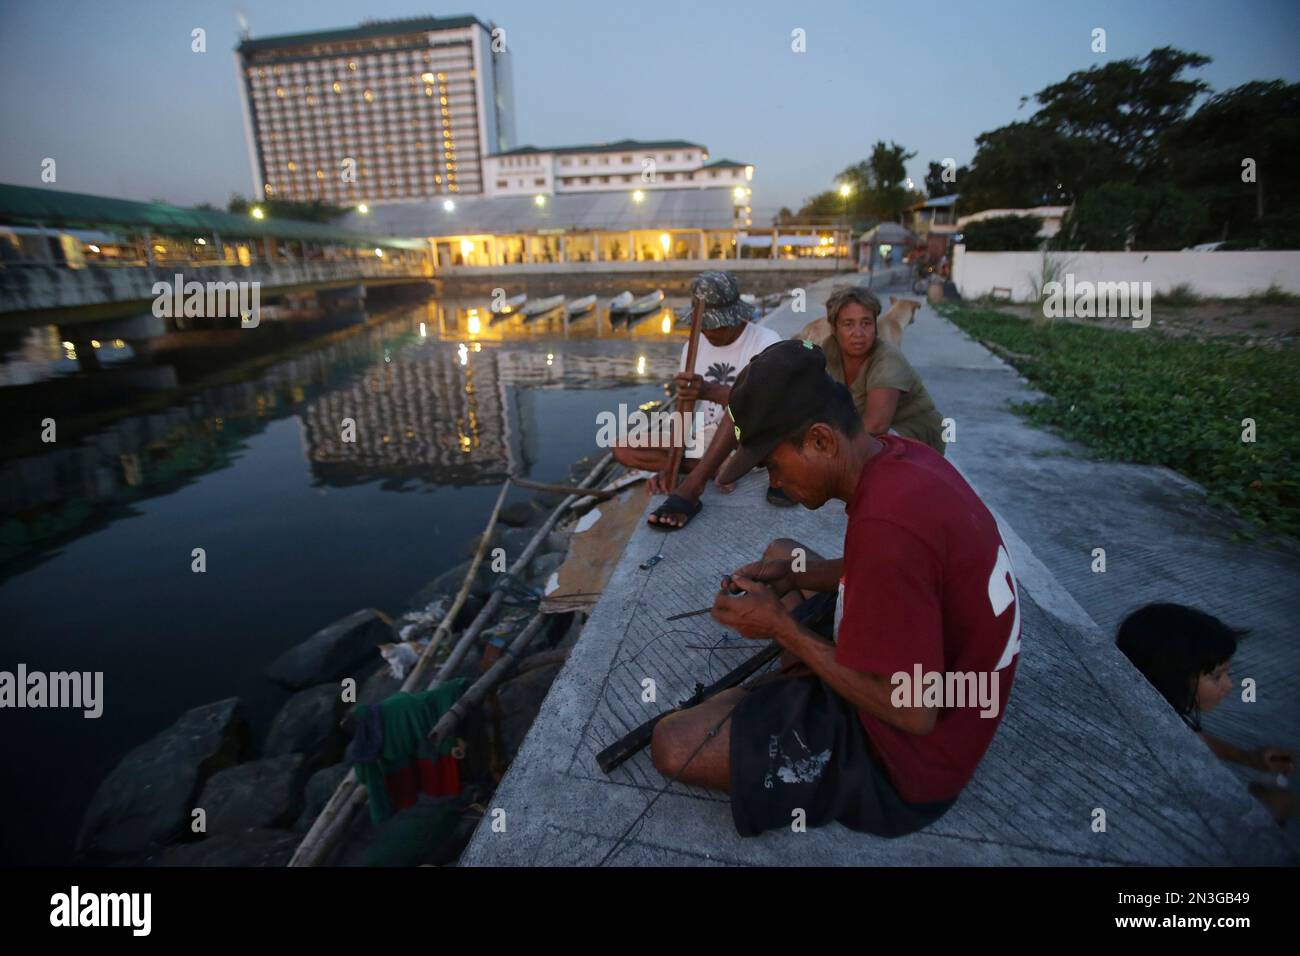 Filipino fisherman Gil Calleo prepares his fishing gear near the Manila  Hotel in Manila, Philippines on Tuesday, Nov. 25, 2014. Calleo spends a  week fishing along Manila Bay and then returns home